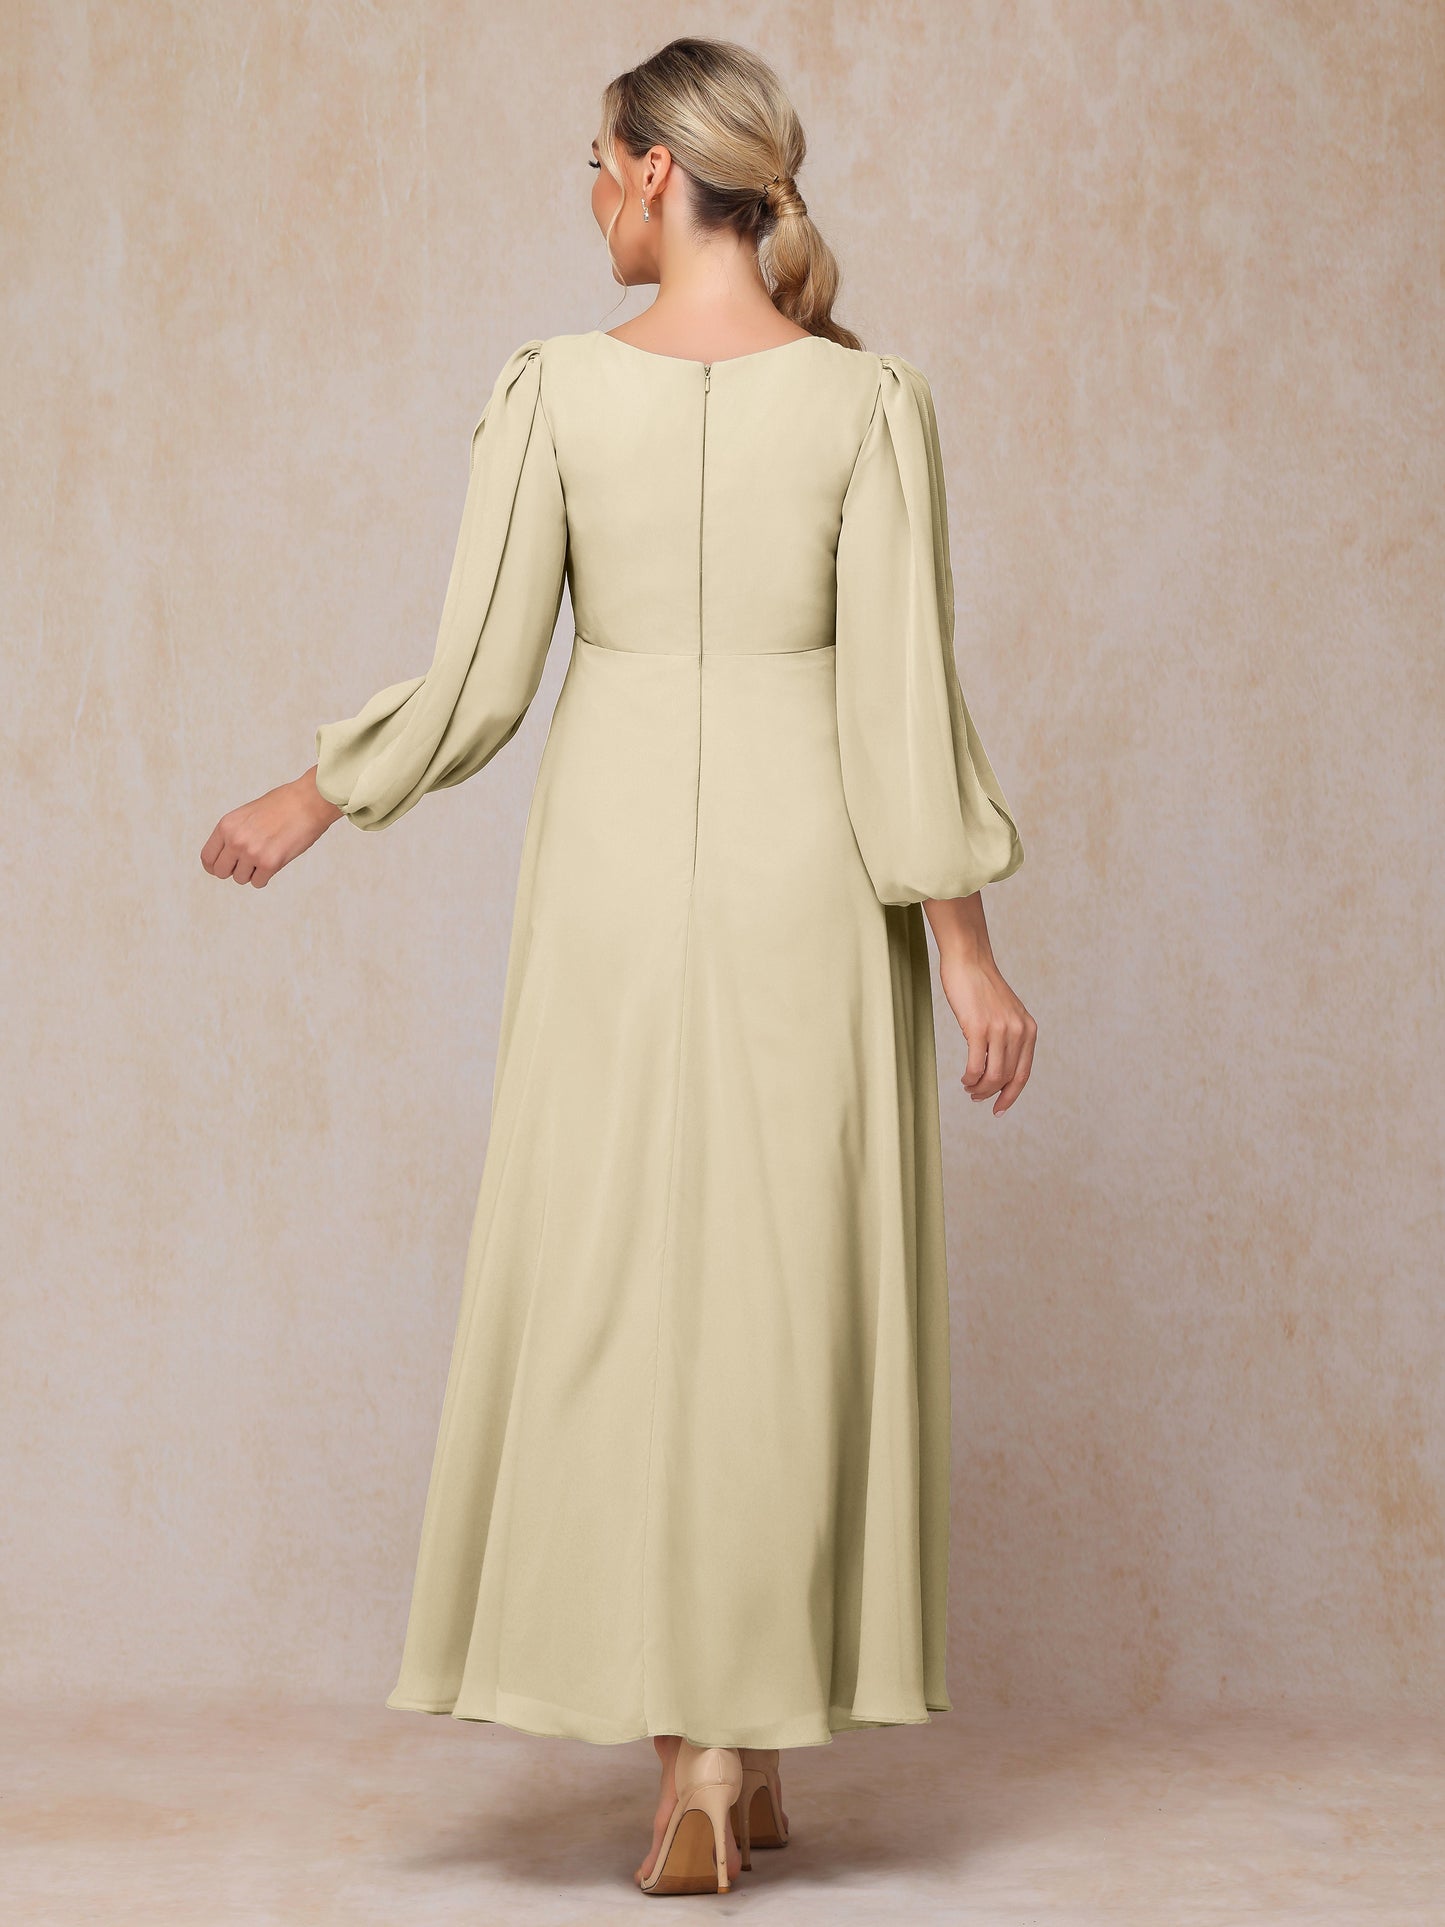 Long Sleeves V Neck Ankle Length Chiffon Wedding Guest Dresses